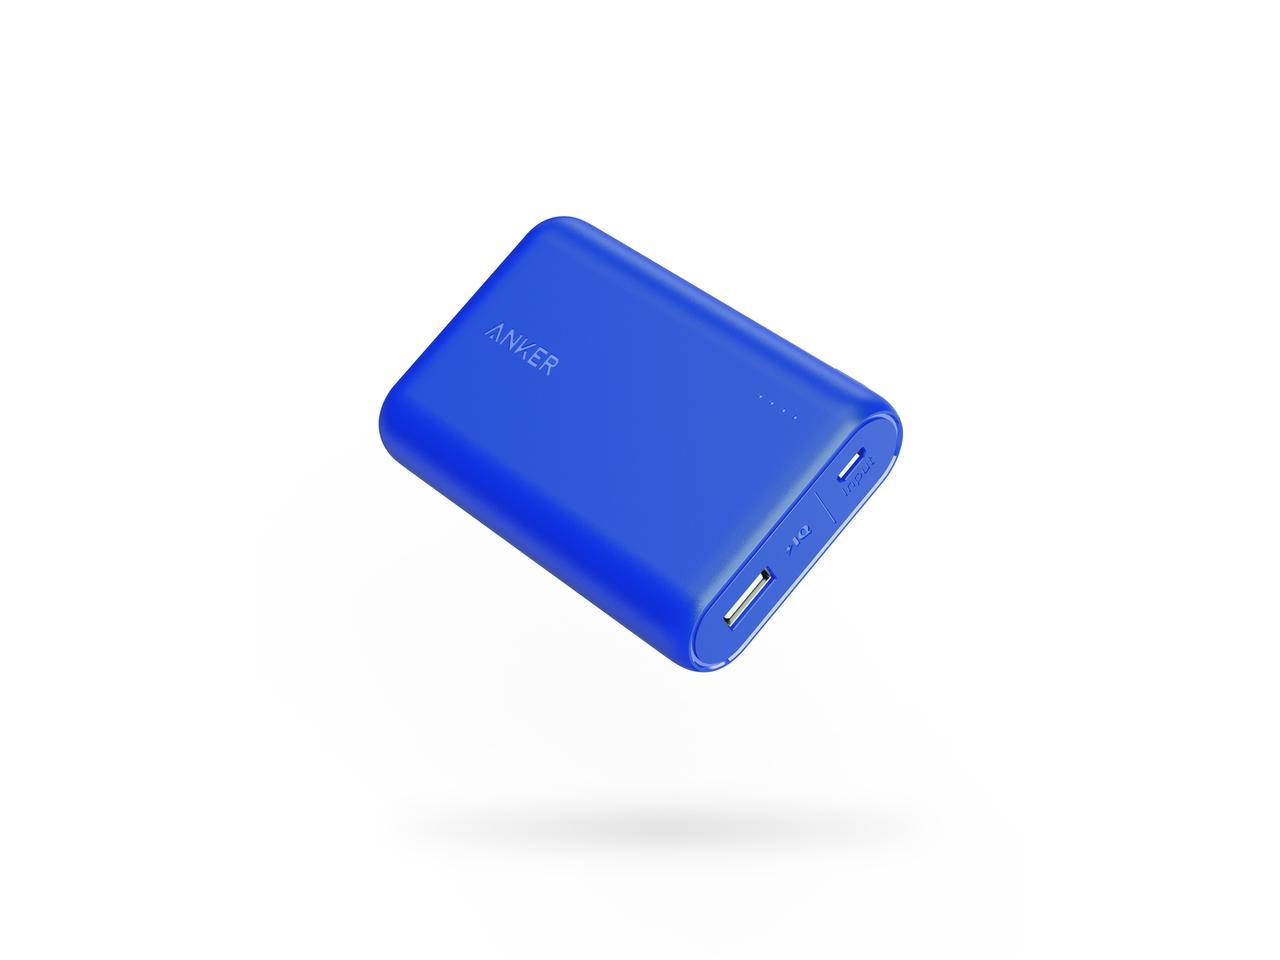 Anker PowerCore 10000, One of The Smallest and Lightest 10000mAh Ultra-Compact, High-Speed Charging Technology Bank for iPhone, Samsung Galaxy and More (Blue) - Newegg.com